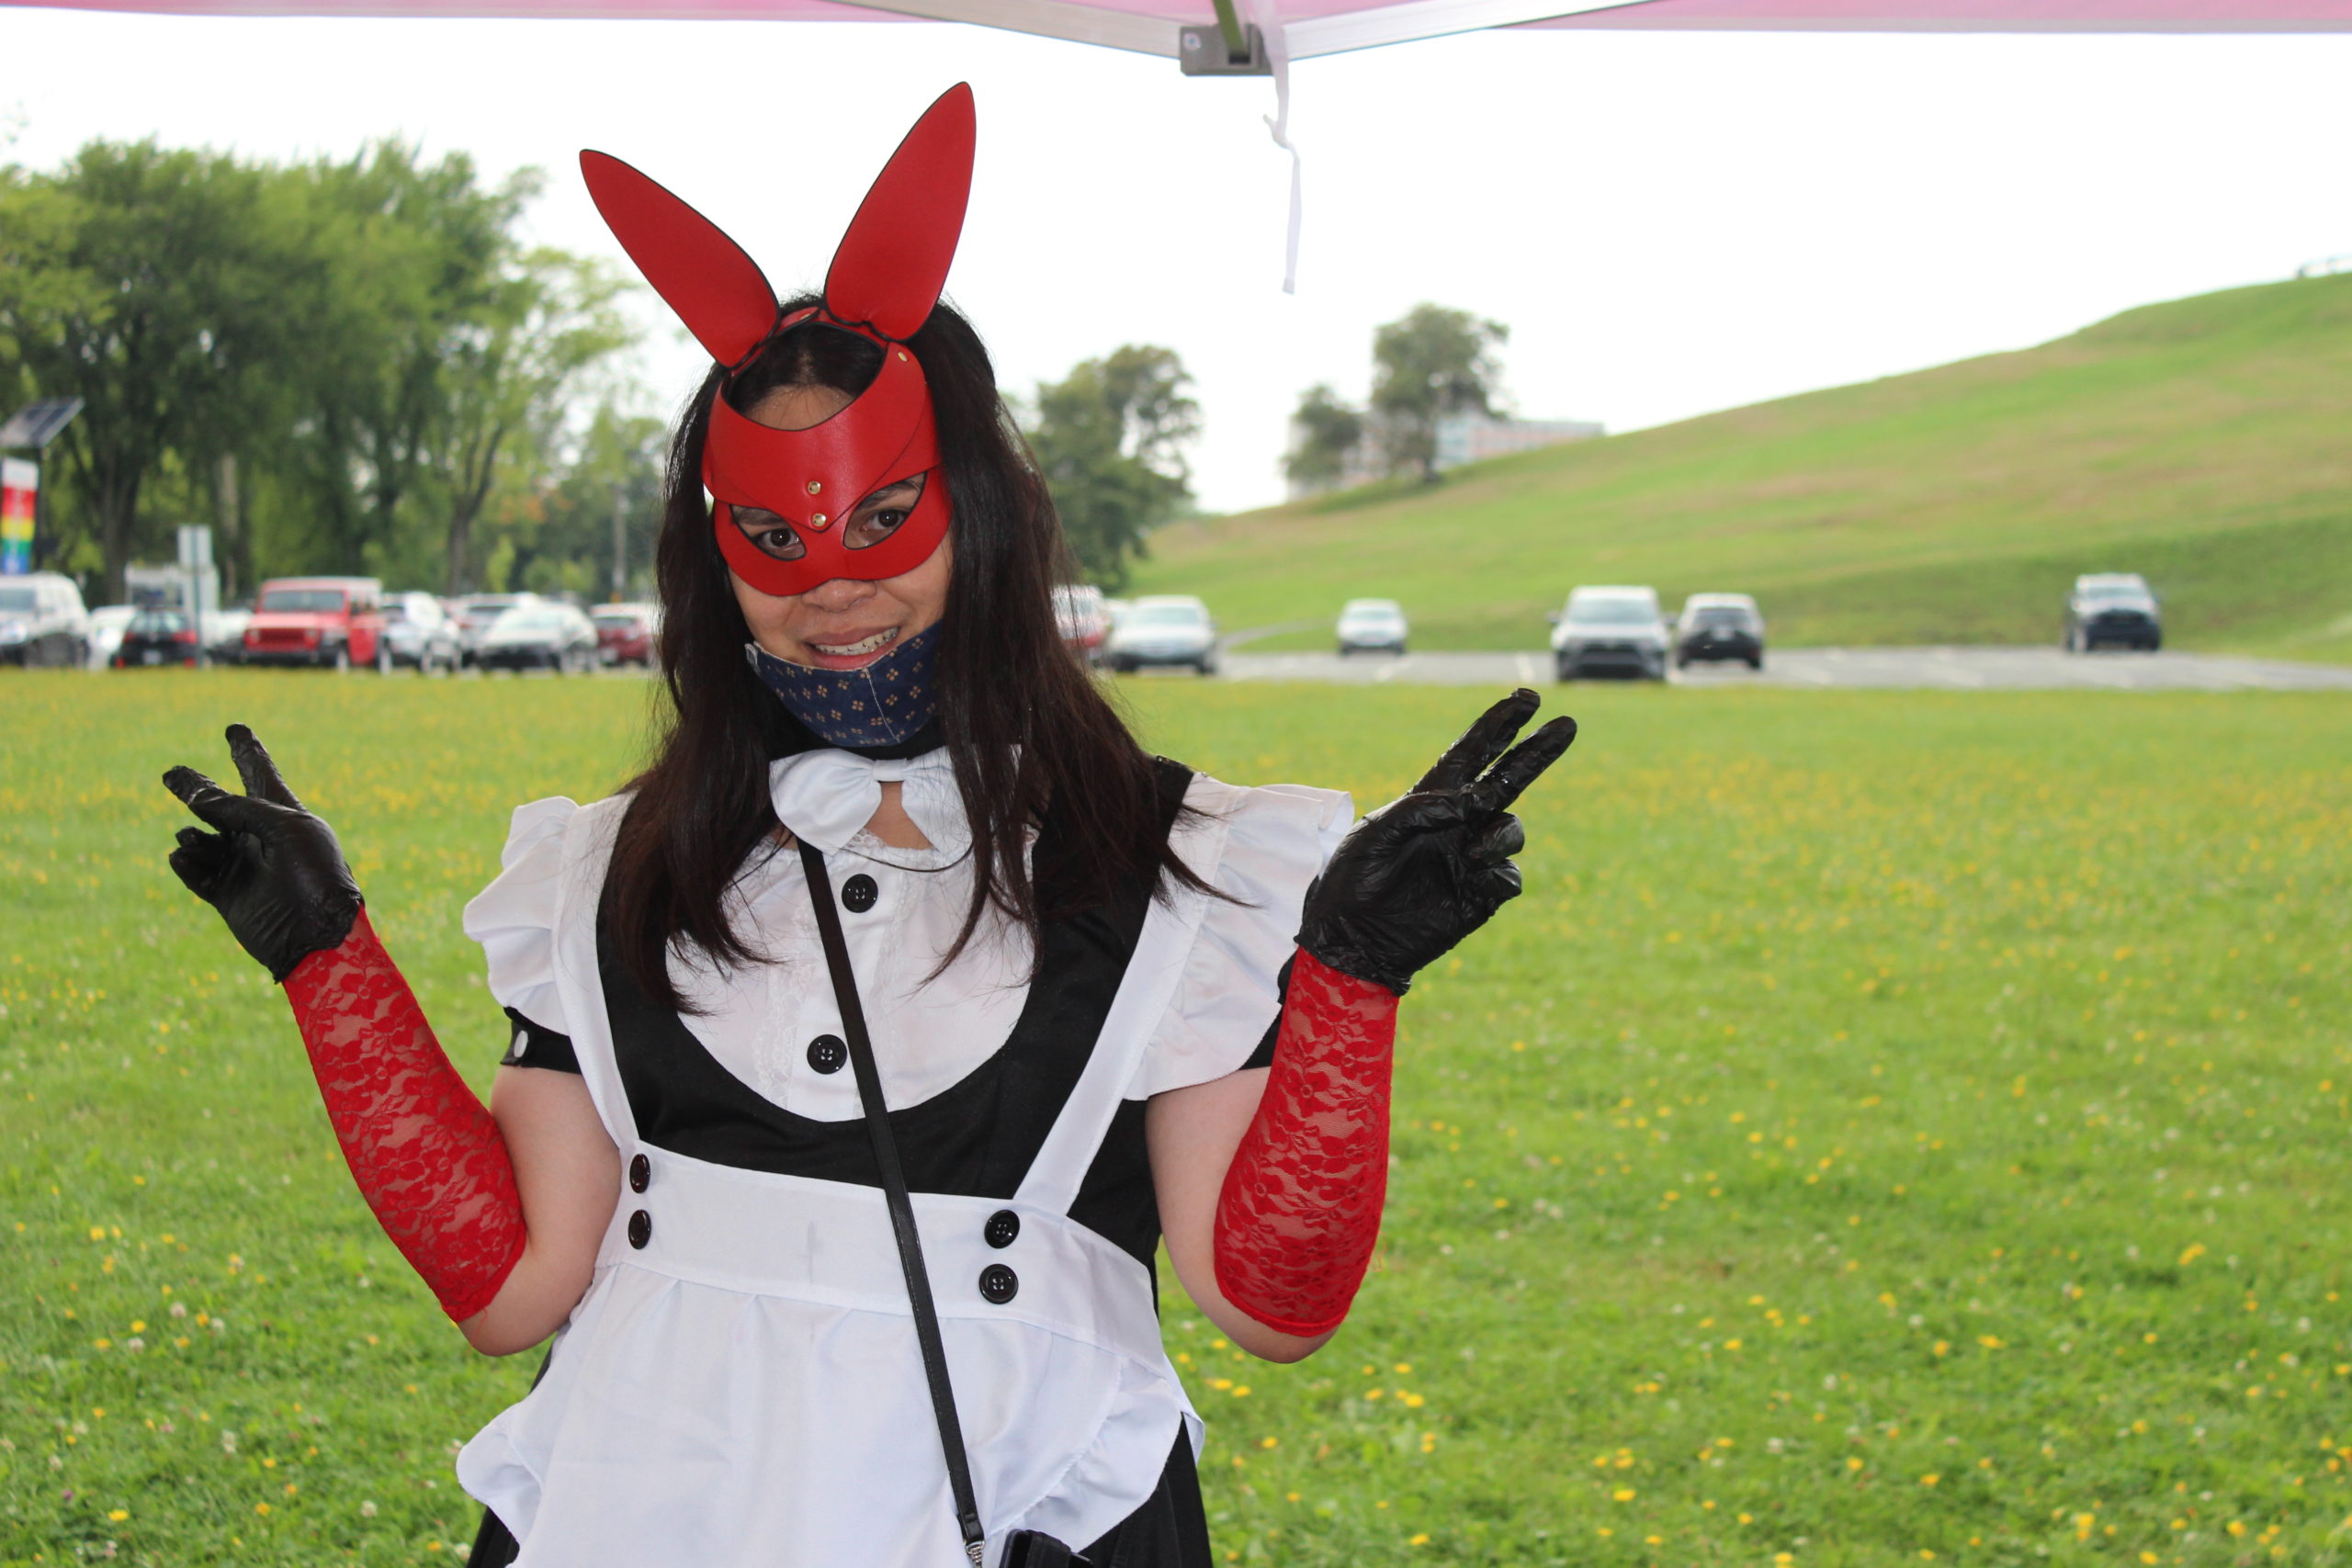 Photo of Excel Gray looking at the camera, smiling and holding up their hands with peace signs. They are wearing a black & white dress, black and red gloves, a face mask, red face covering with bunny ears. They are standing in a green field with a parking lot in the distance.